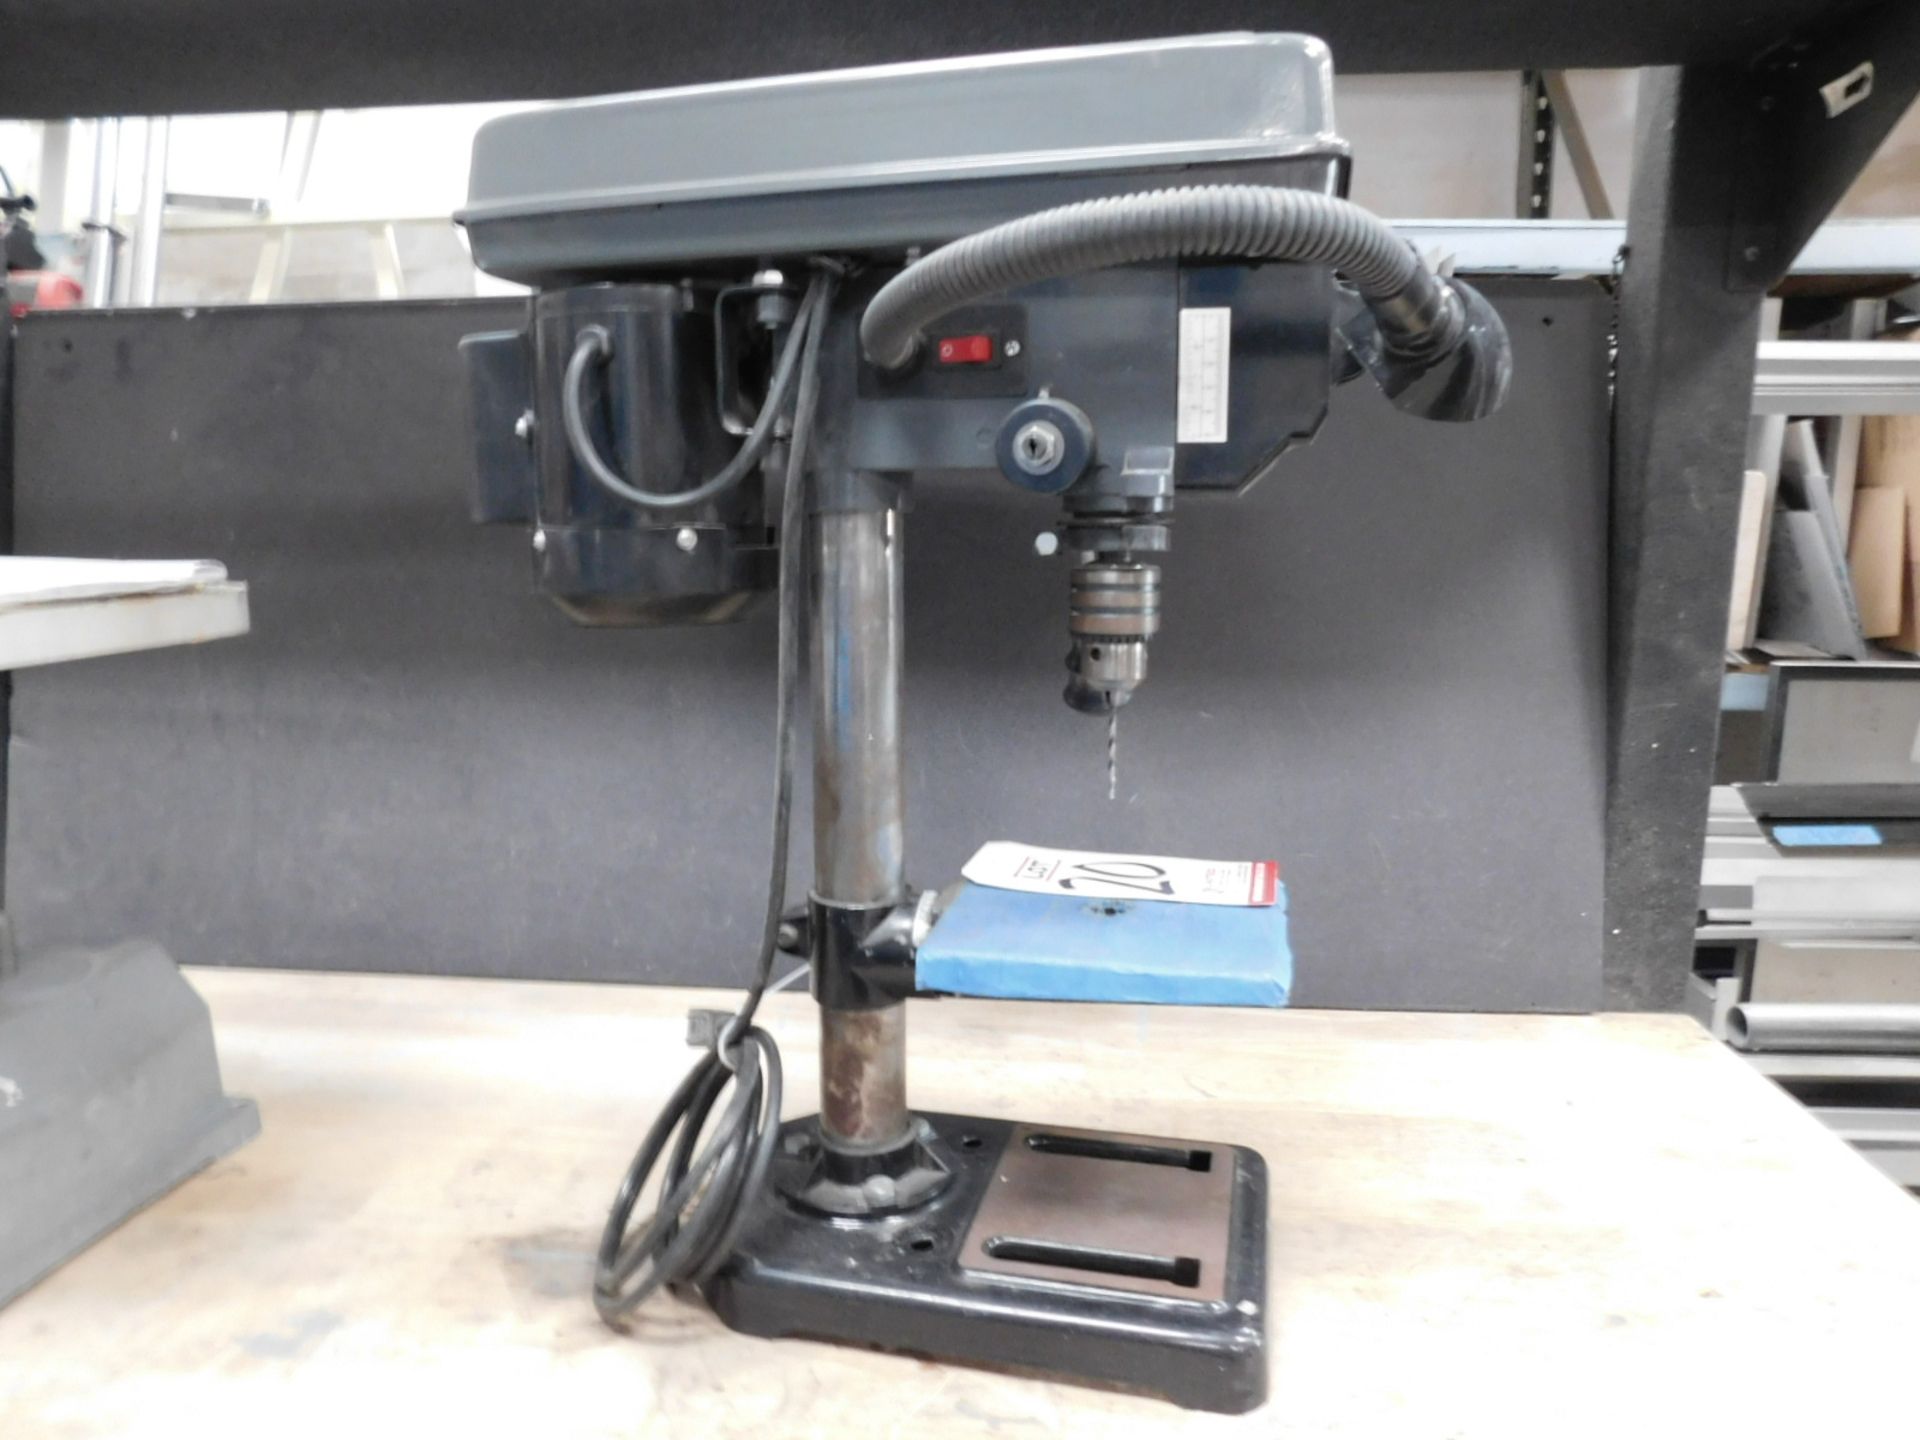 CENTRAL MACHINERY 8" BENCHTOP DRILL PRESS, 5-SPEED, S/N 366851708 - Image 2 of 3